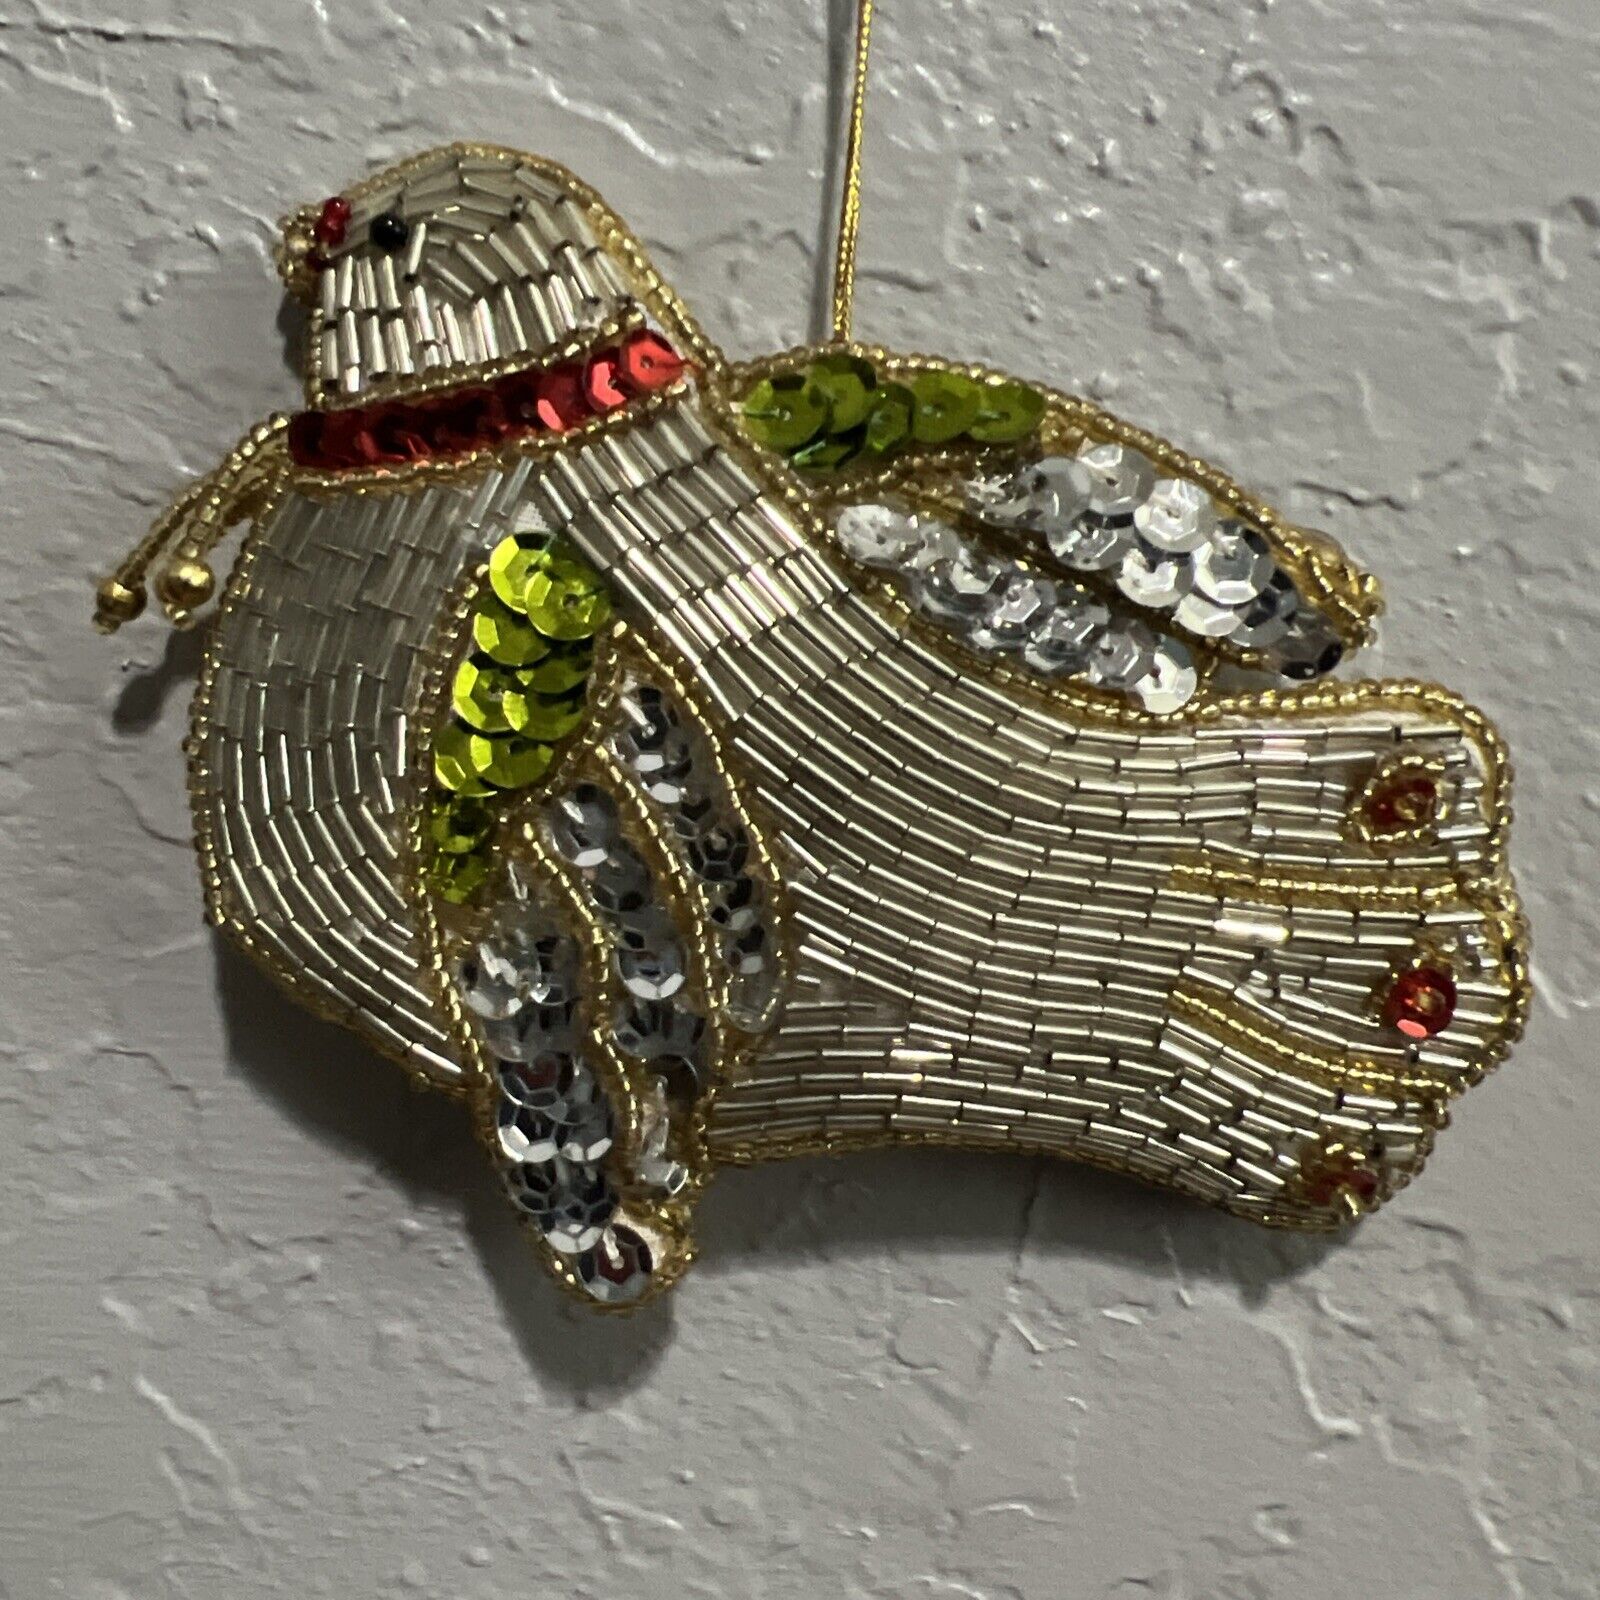 Beautiful 5” Texture Wall Hanging, Ornament Bird Embellished With Beads Sequins